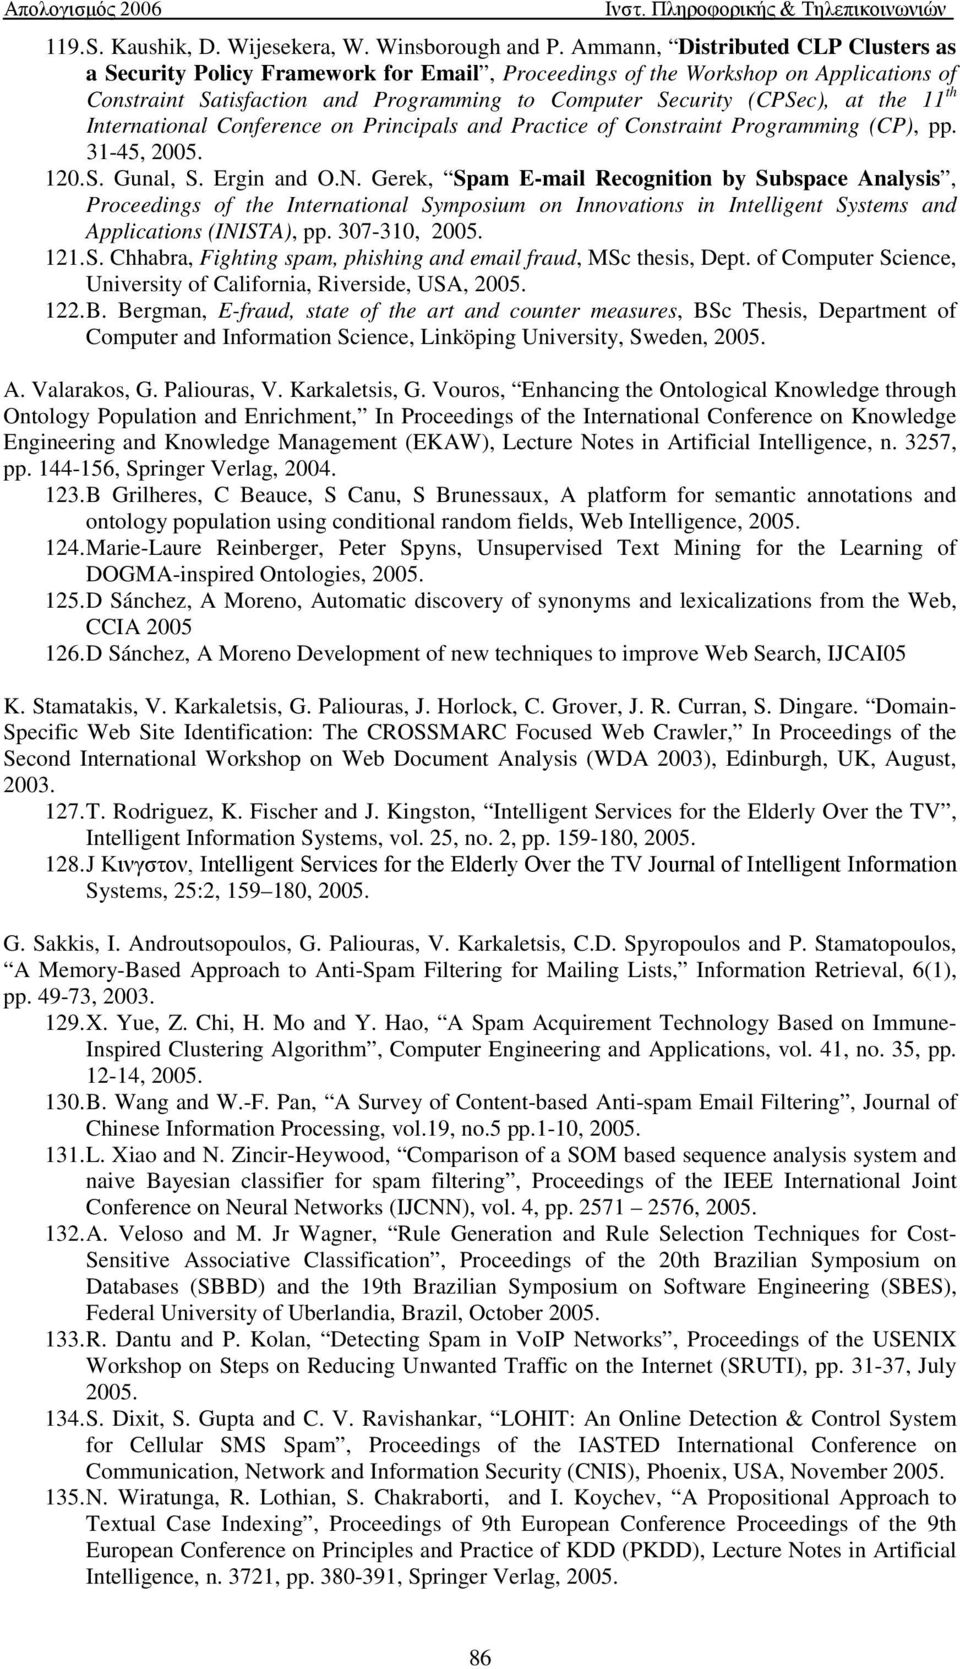 11 th International Conference on Principals and Practice of Constraint Programming (CP), pp. 31-45, 2005. 120. S. Gunal, S. Ergin and O.N.